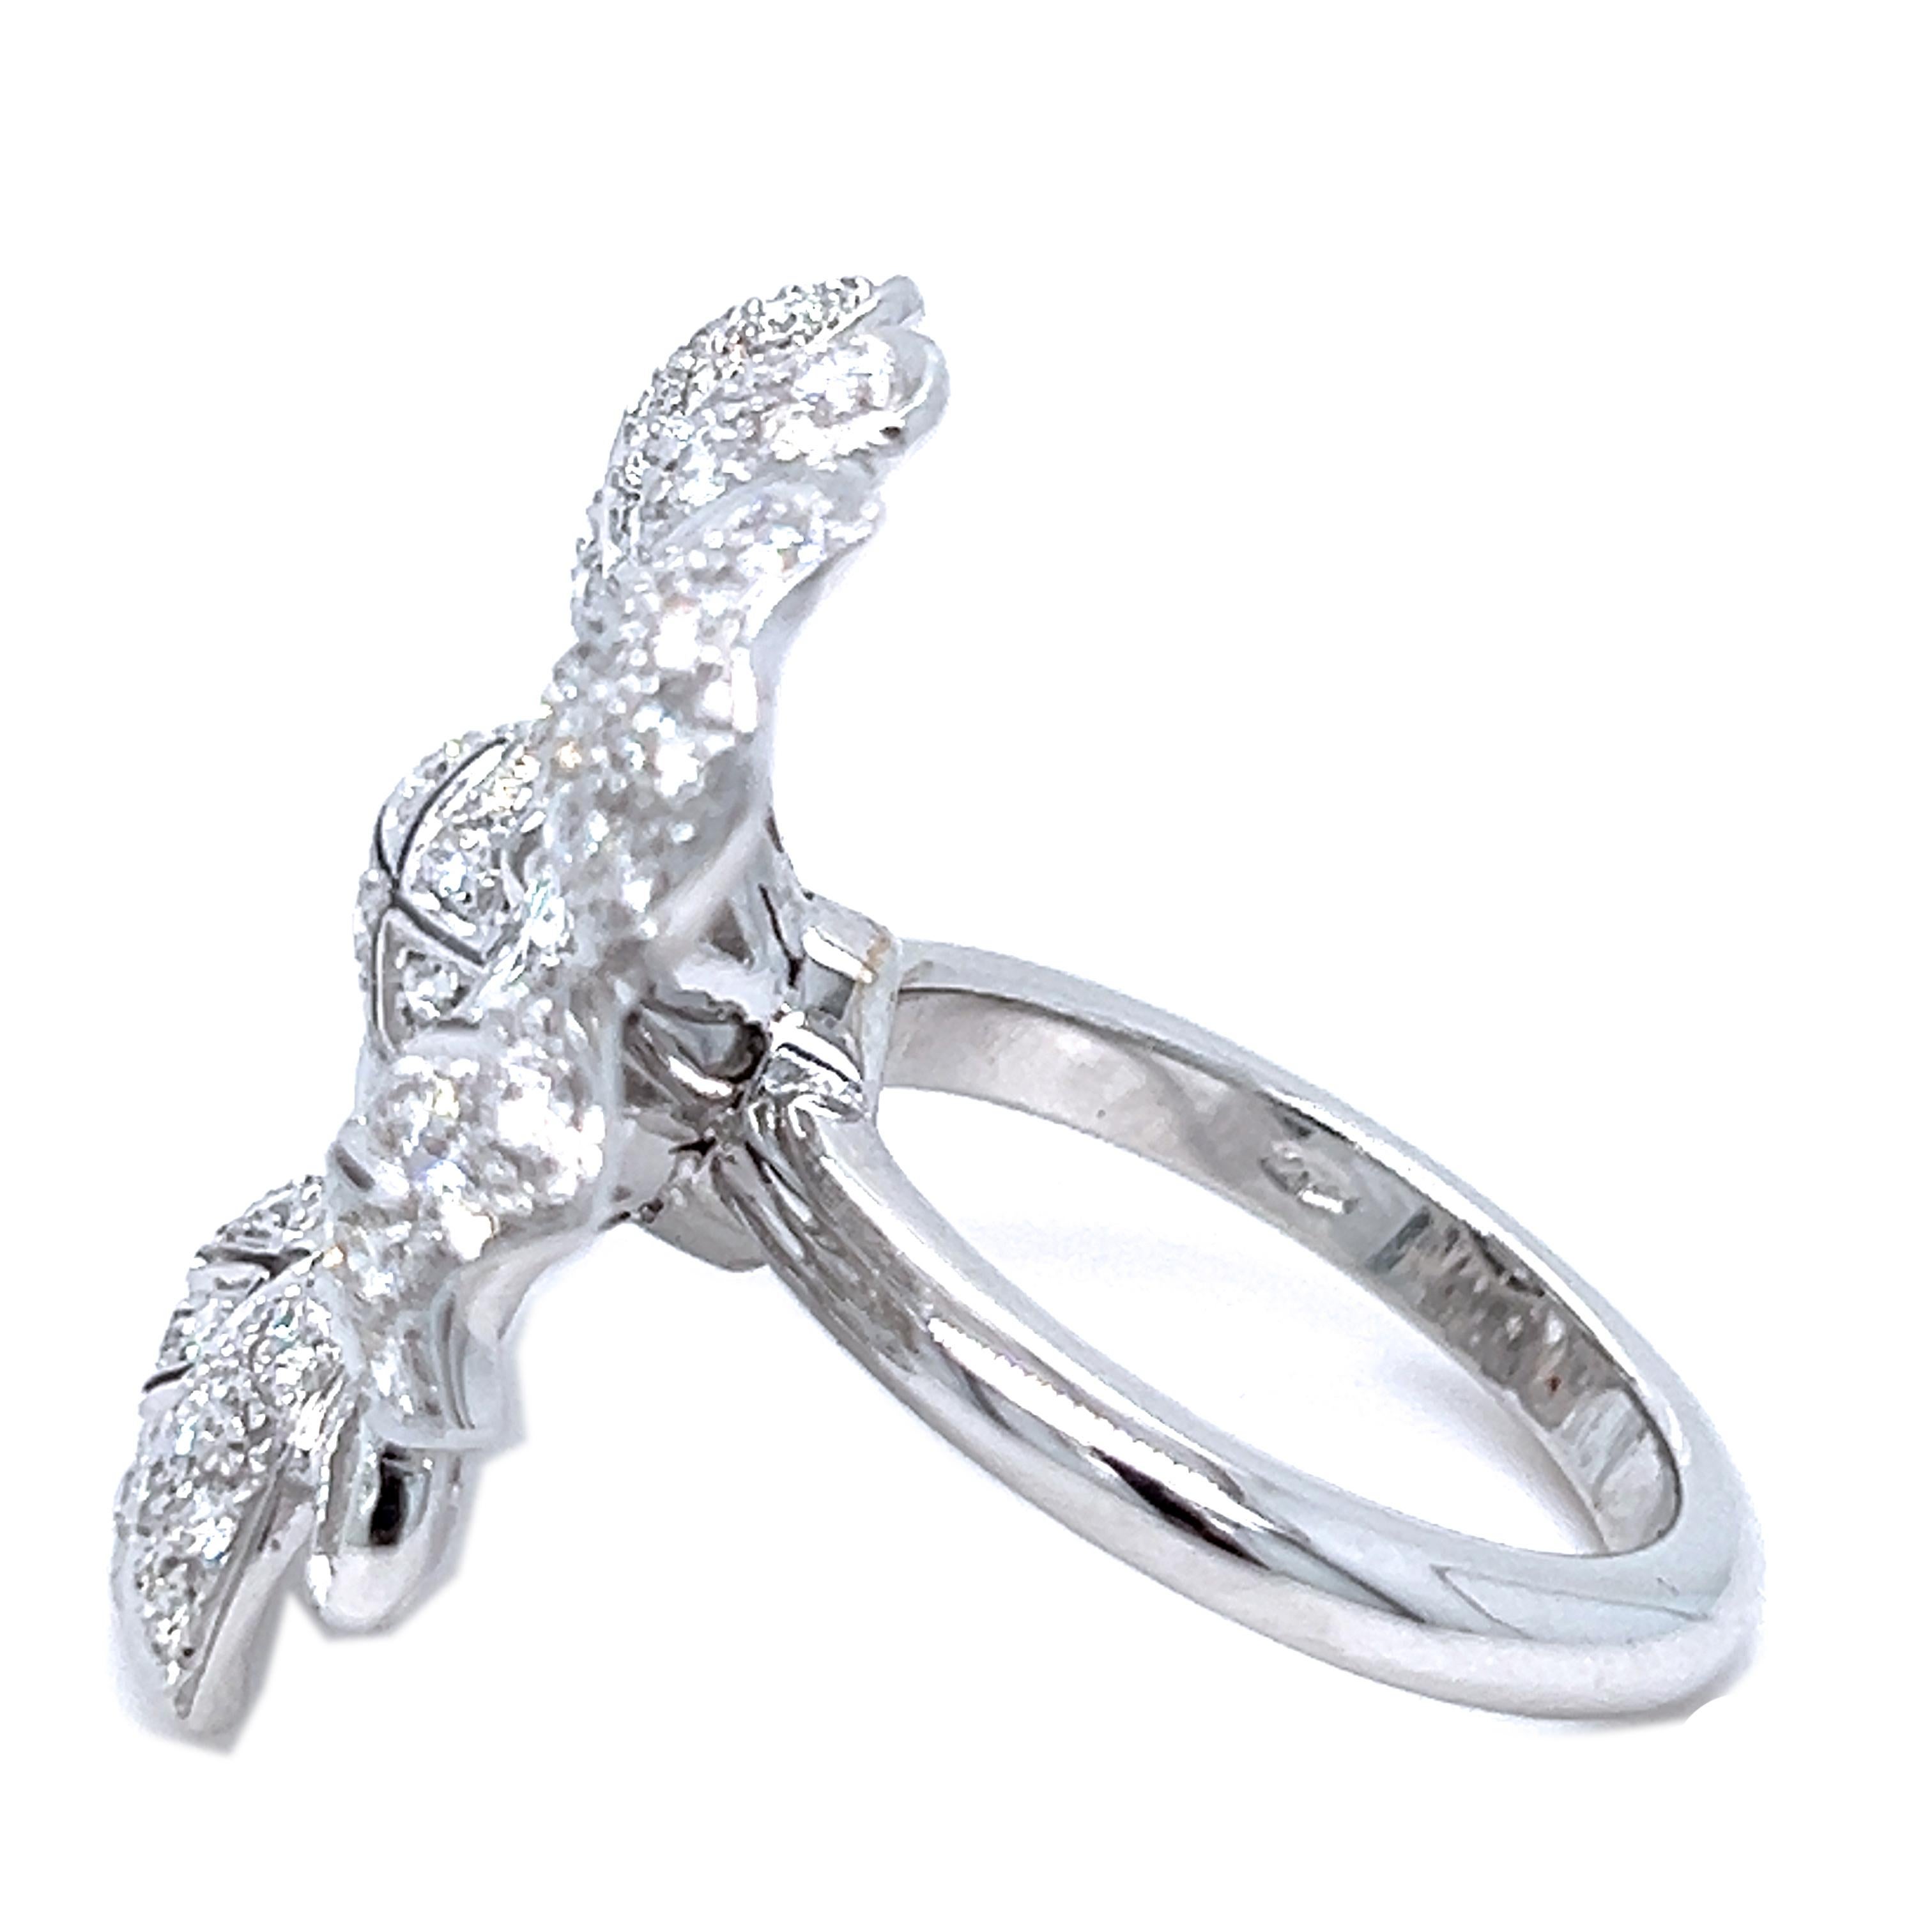 Berca Original 1970 1.67Kt White Diamond White Gold Flower Cocktail Ring In New Condition For Sale In Valenza, IT